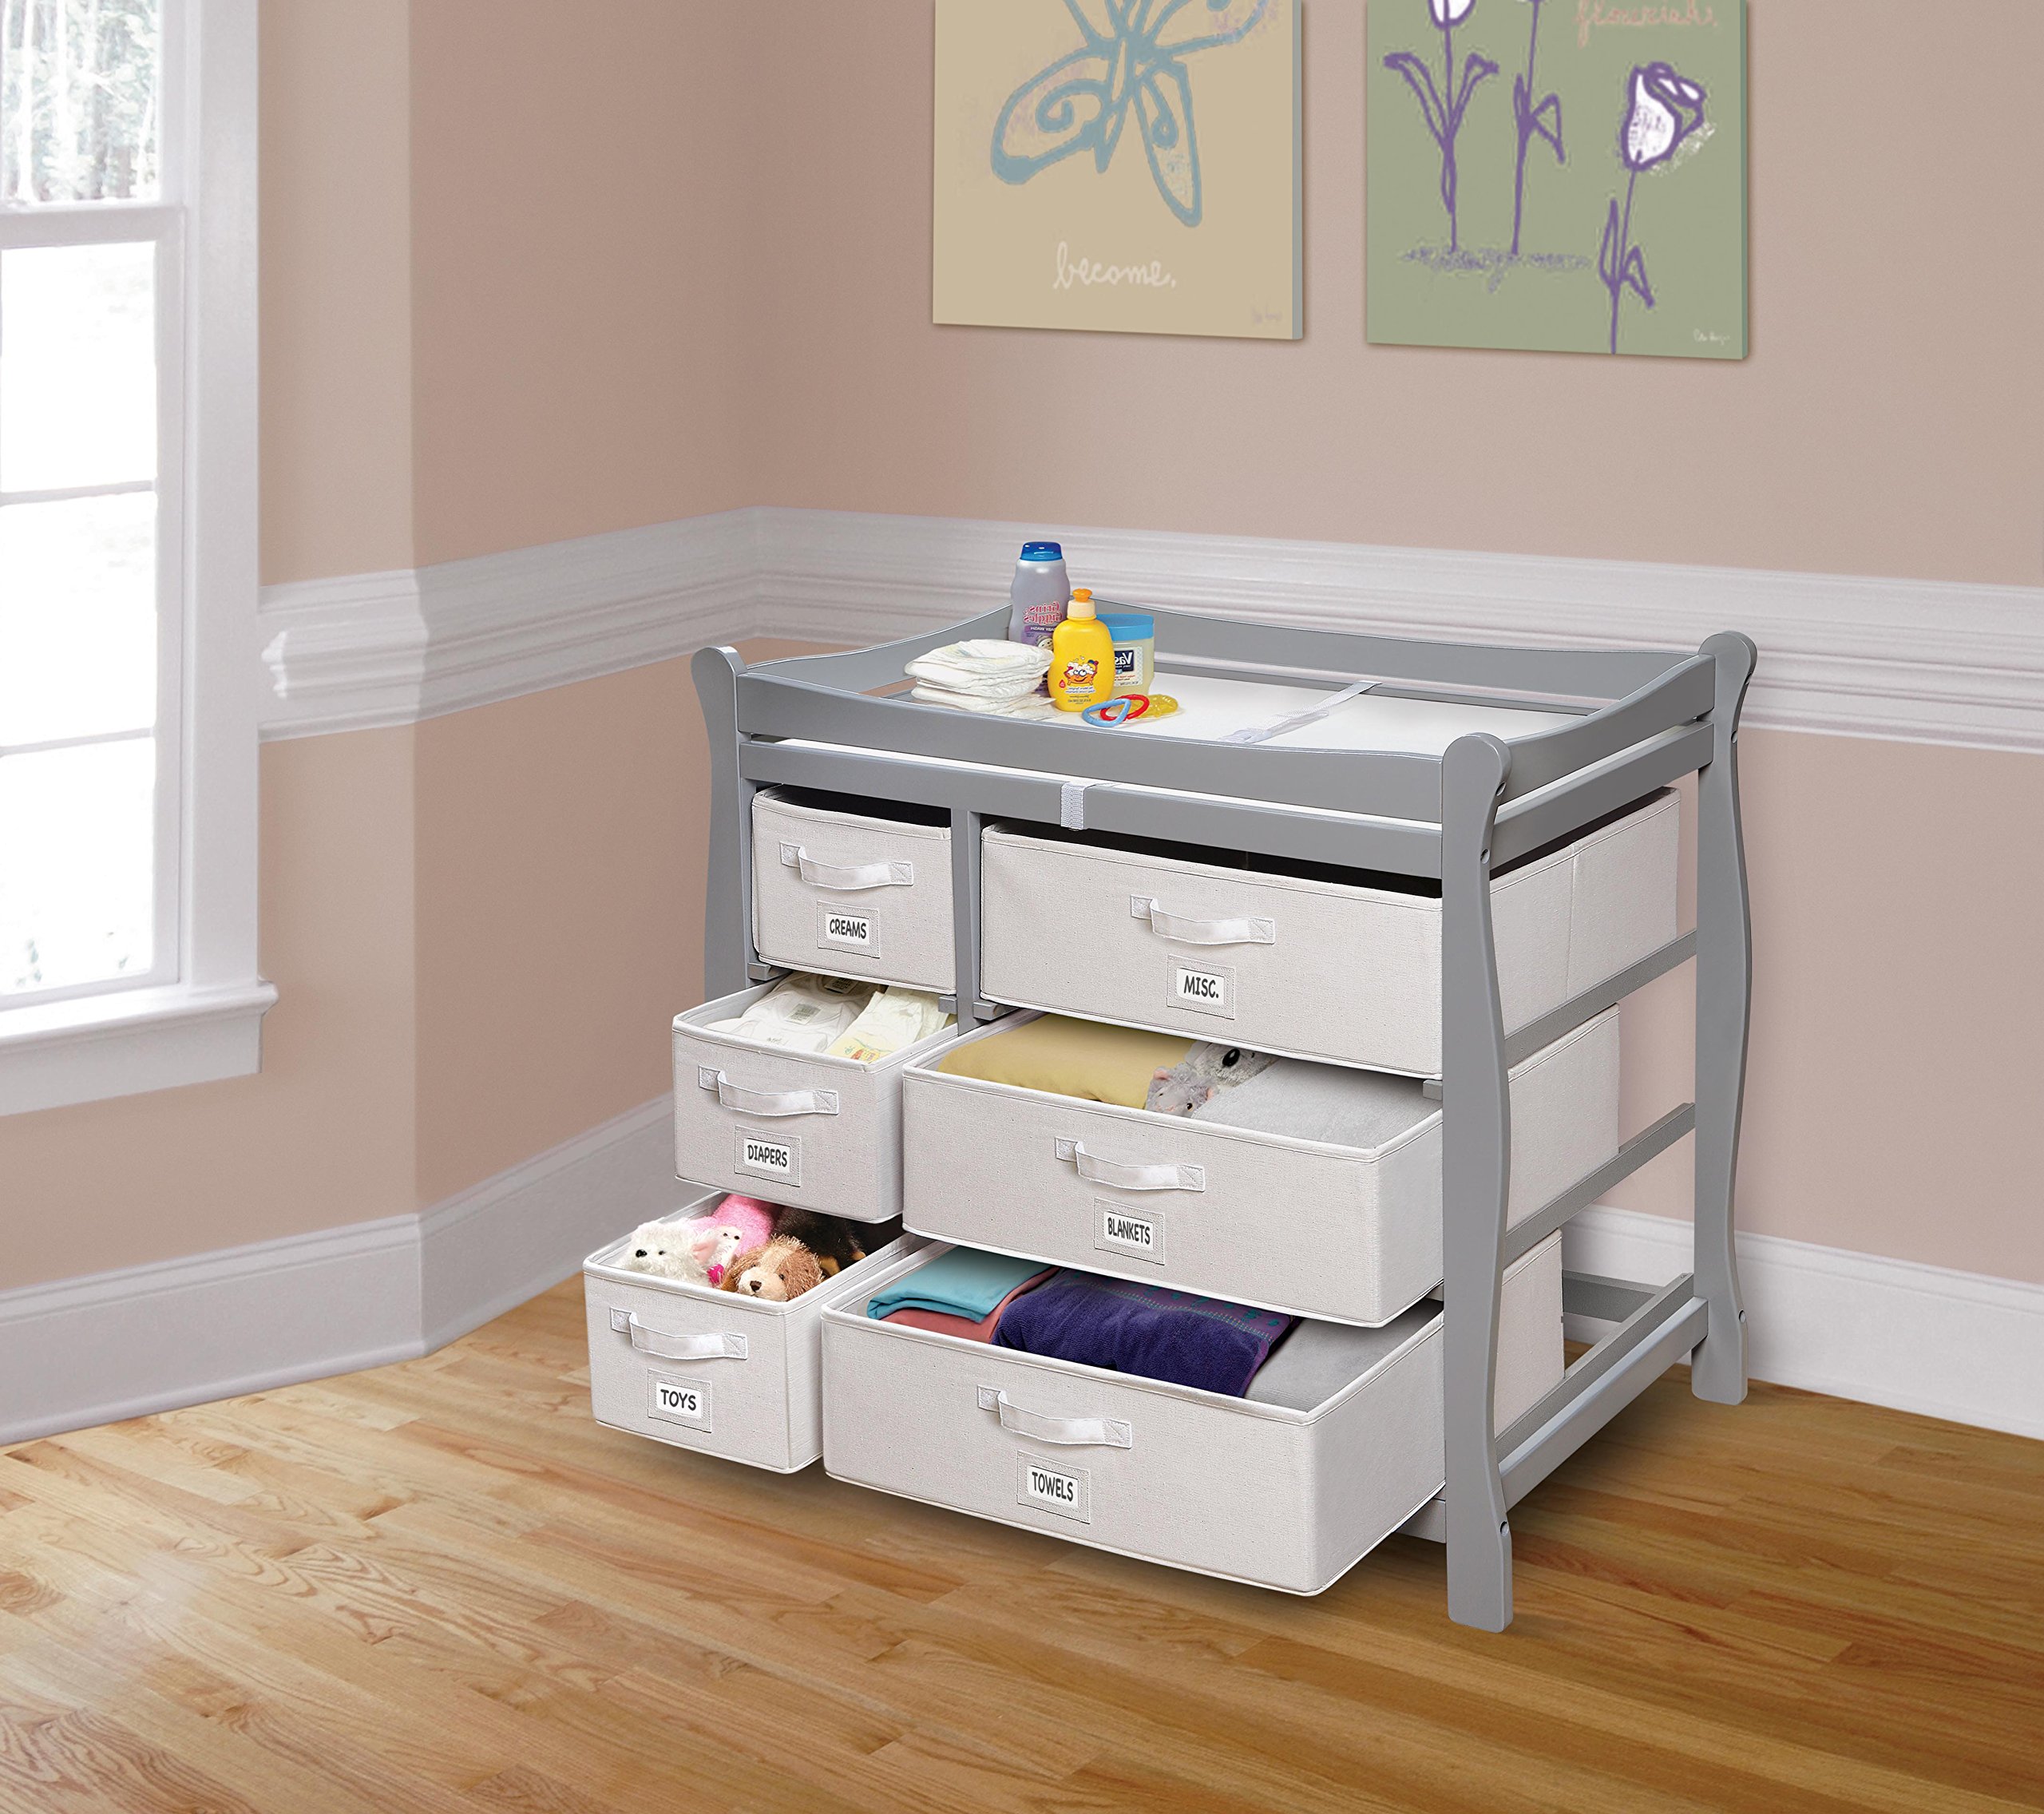 Badger Basket Sleigh Style Baby Changing Table with 6 Storage Baskets & Pad, Cool Gray/White